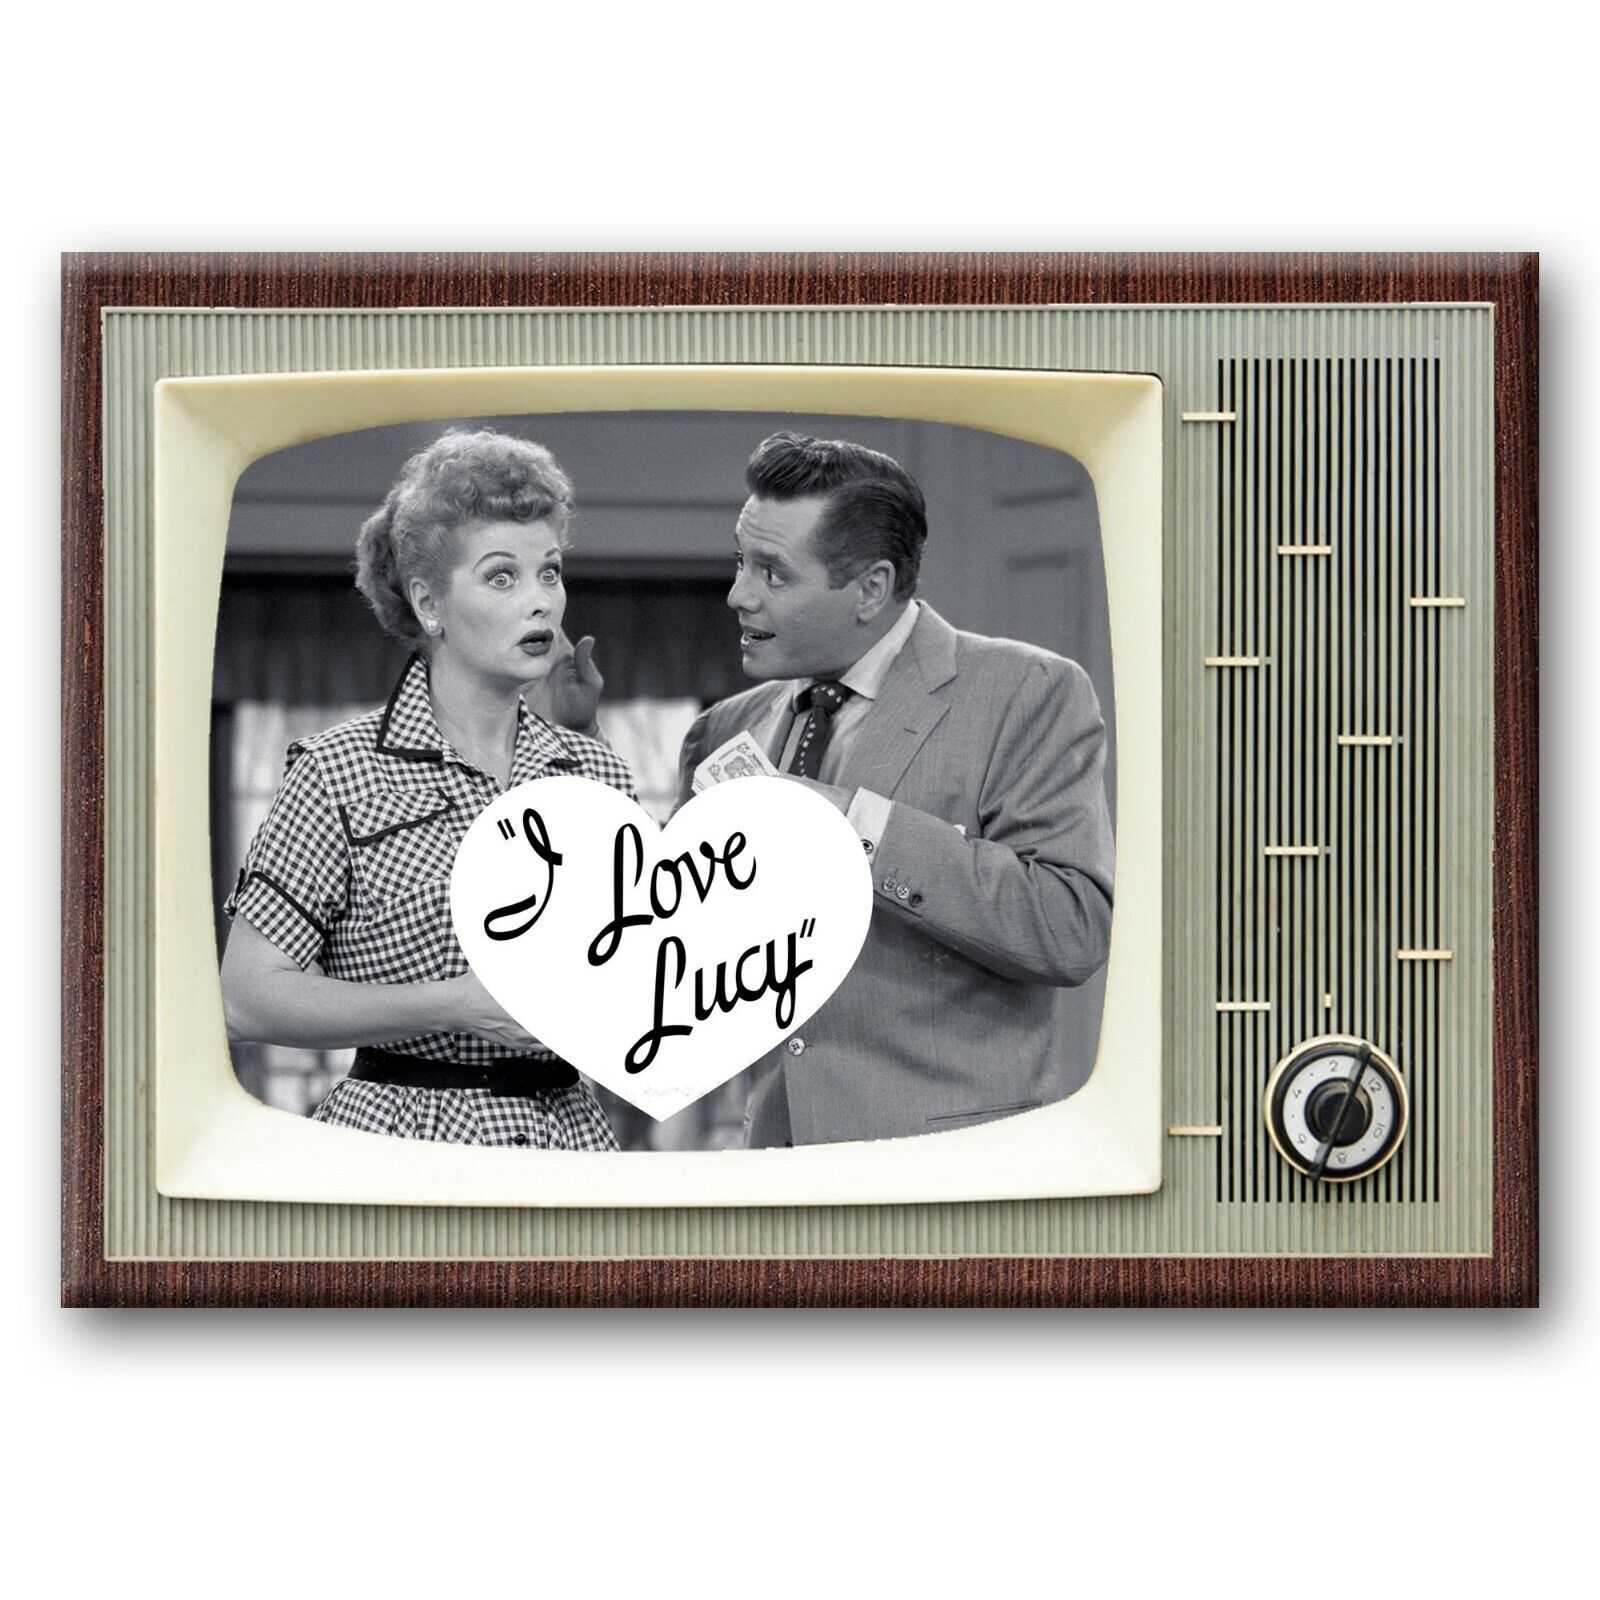 I LOVE LUCY Classic TV 3.5 inches x 2.5 inches Steel Cased FRIDGE MAGNET